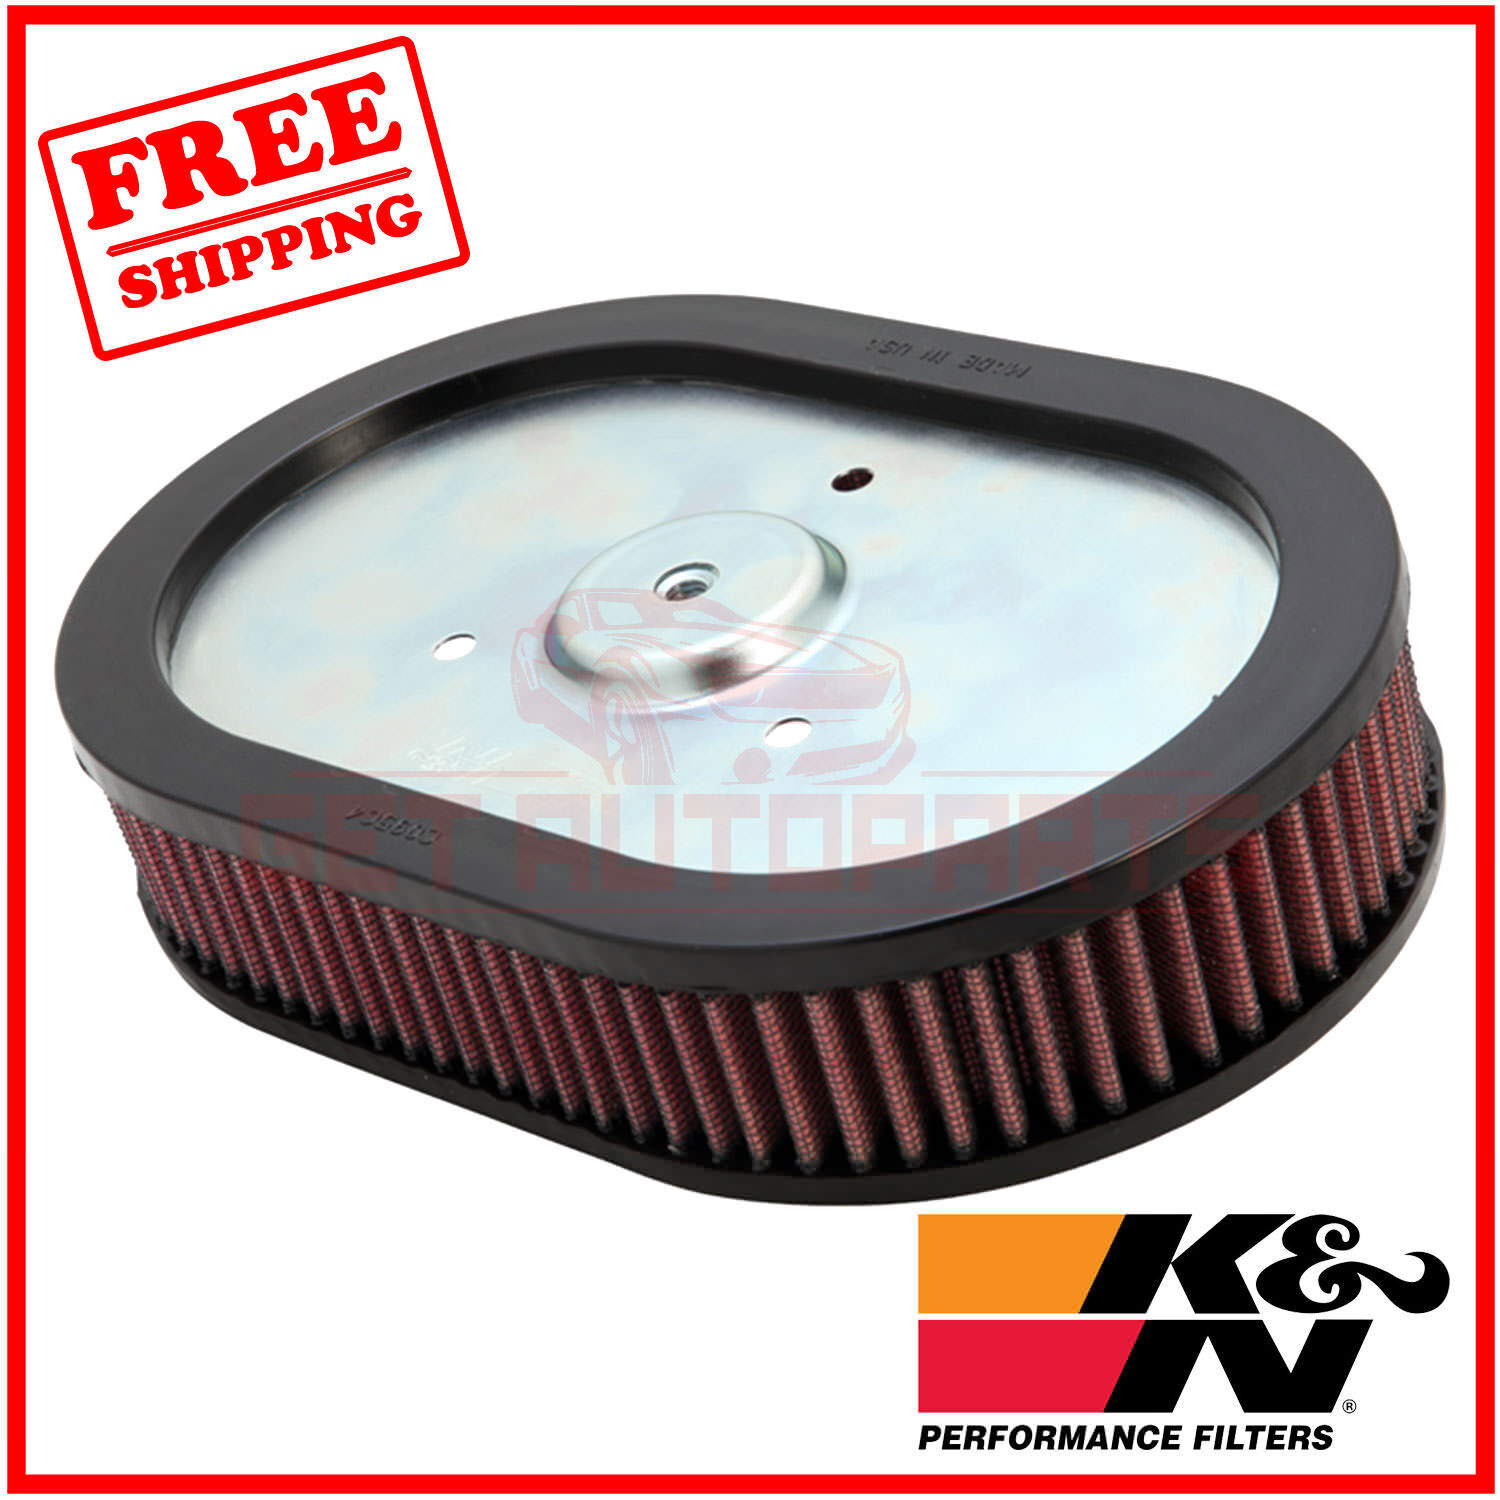 K&N Replacement Air Filter for Harley Davidson FLHXSE3 CVO Street Glide 2012